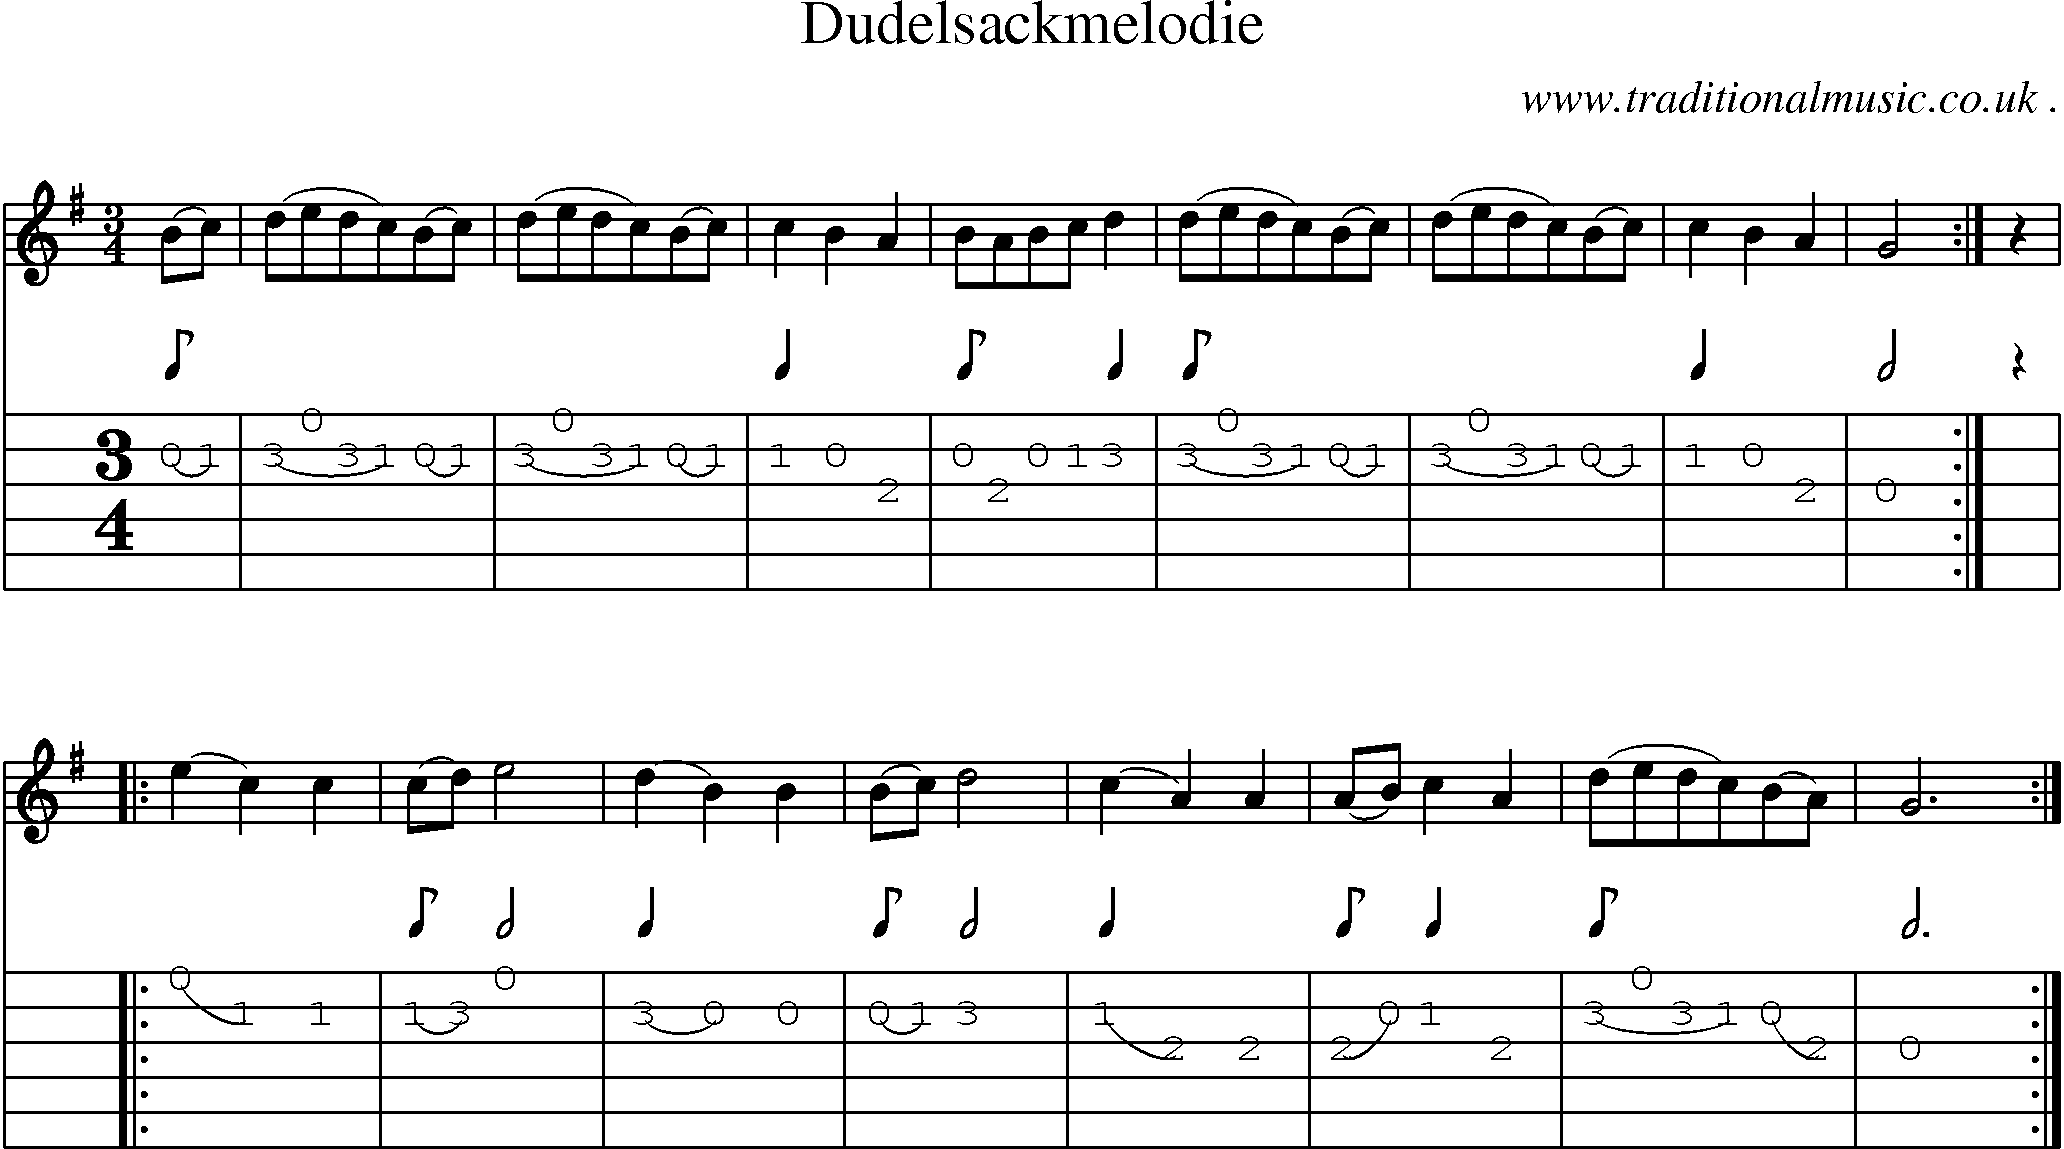 Sheet-Music and Guitar Tabs for Dudelsackmelodie